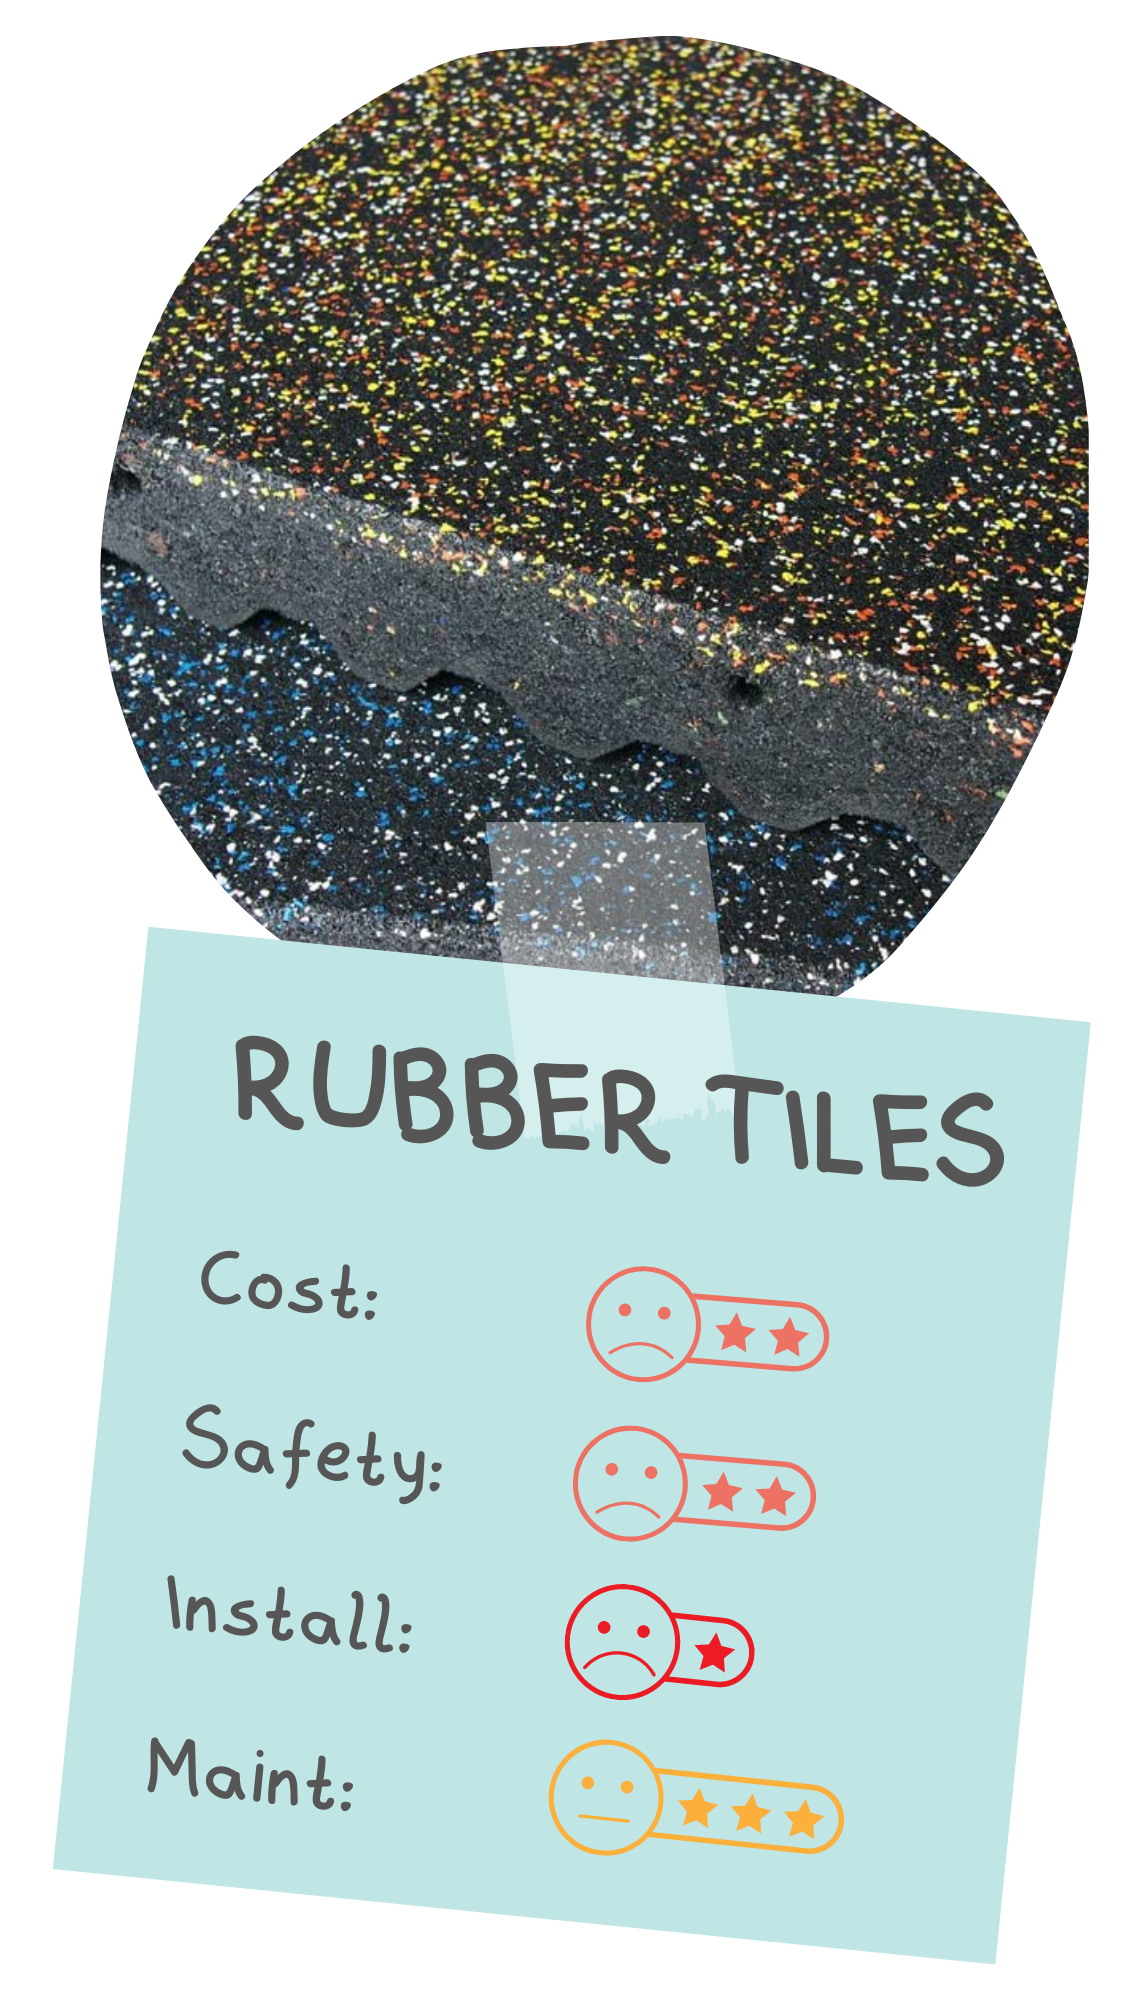 Rubber tiles are rated by four categories. They receive 2 stars for cost, 2 stars for safety, 1 star for installation, and 3 stars for maintenance.